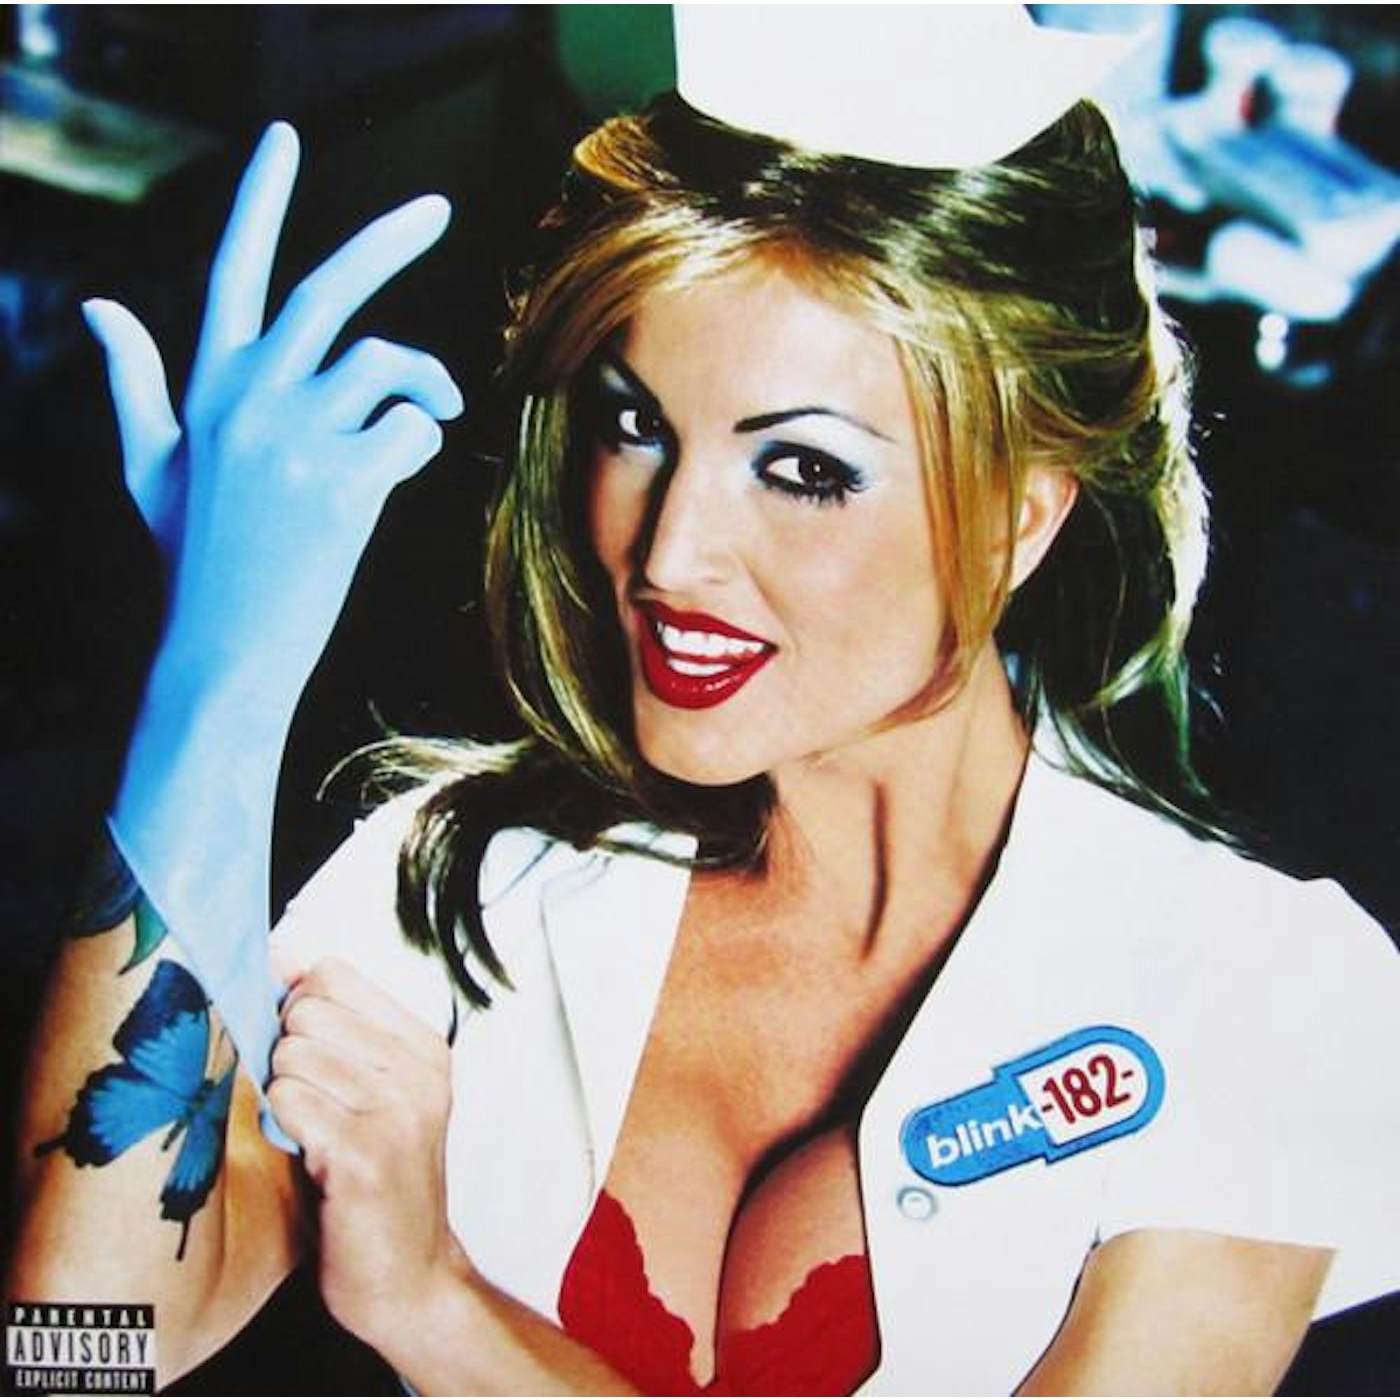 blink-182 ENEMA OF THE STATE (X) Vinyl Record